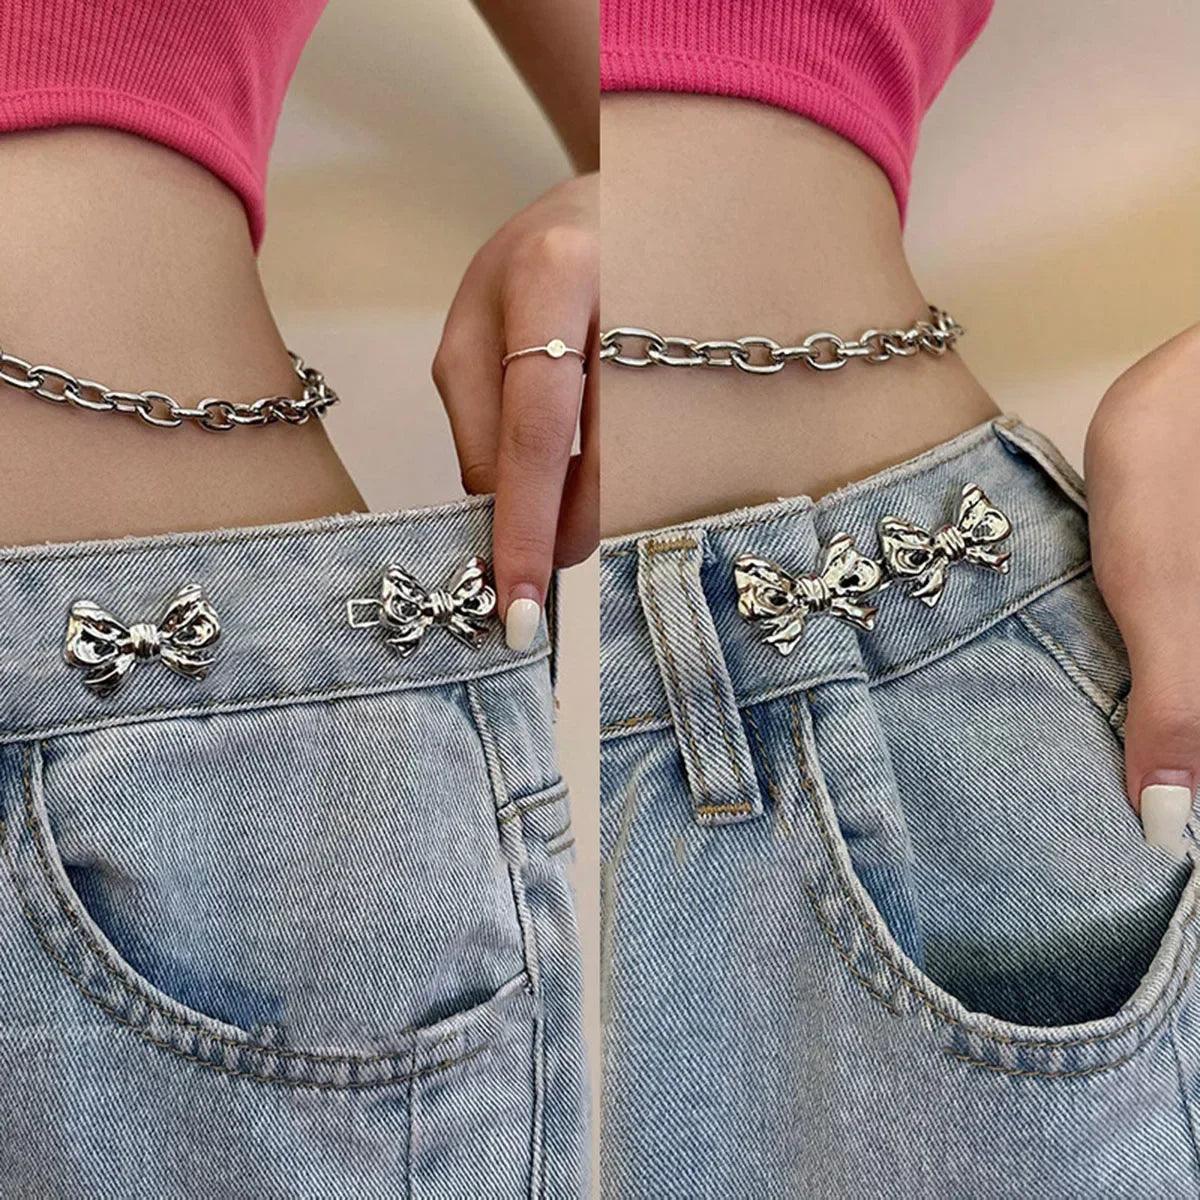 Waist Tightening Bowknot Button Adjusters Set for Pants and Skirts - Stylish and Convenient  ourlum.com   